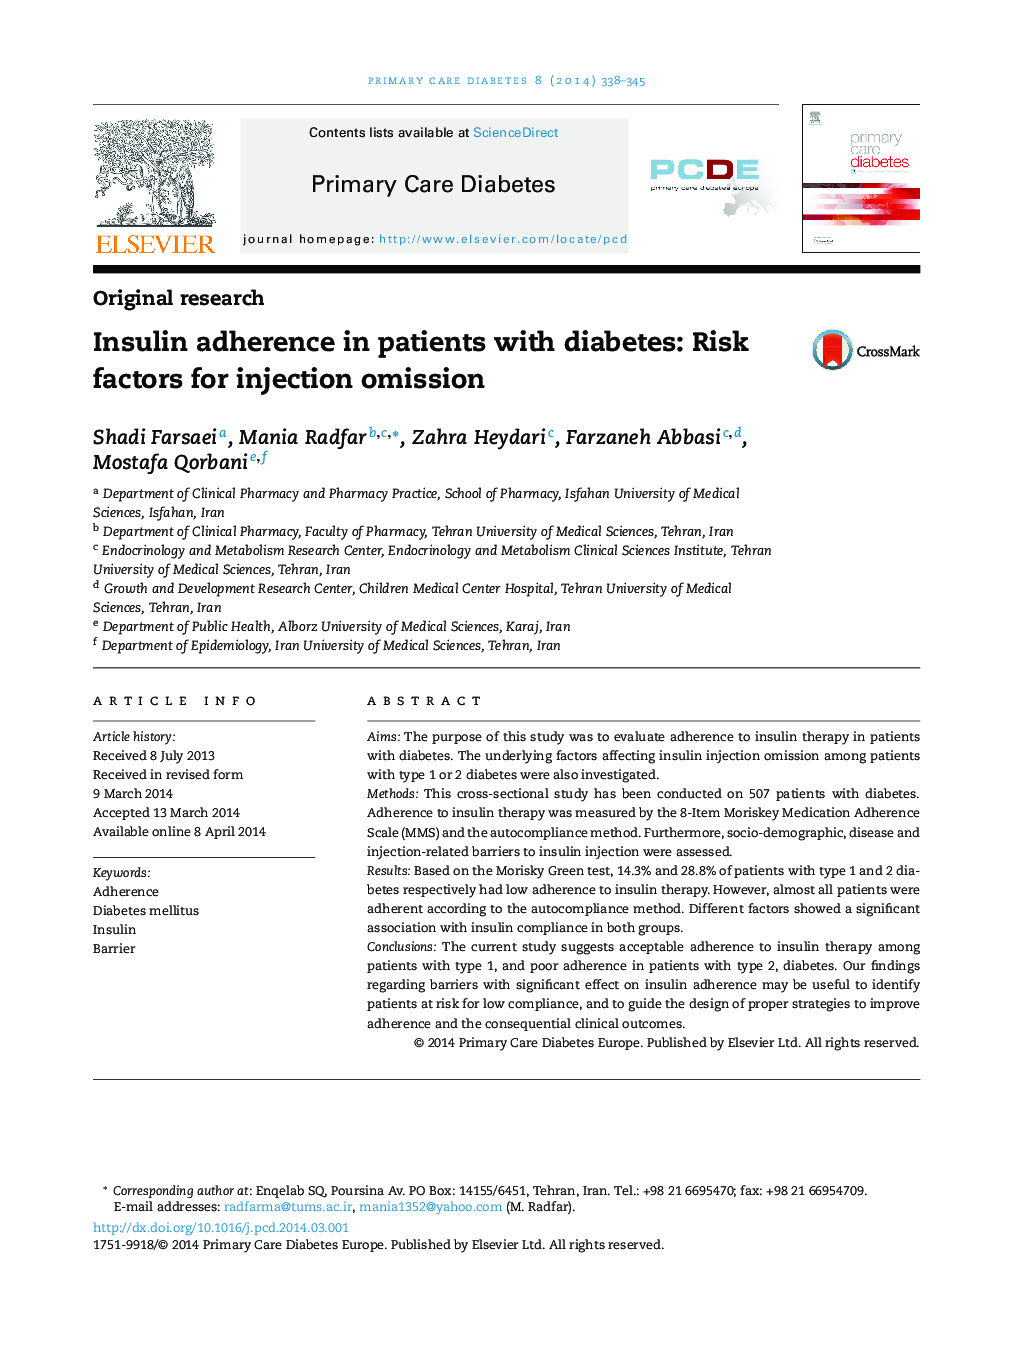 Insulin adherence in patients with diabetes: Risk factors for injection omission